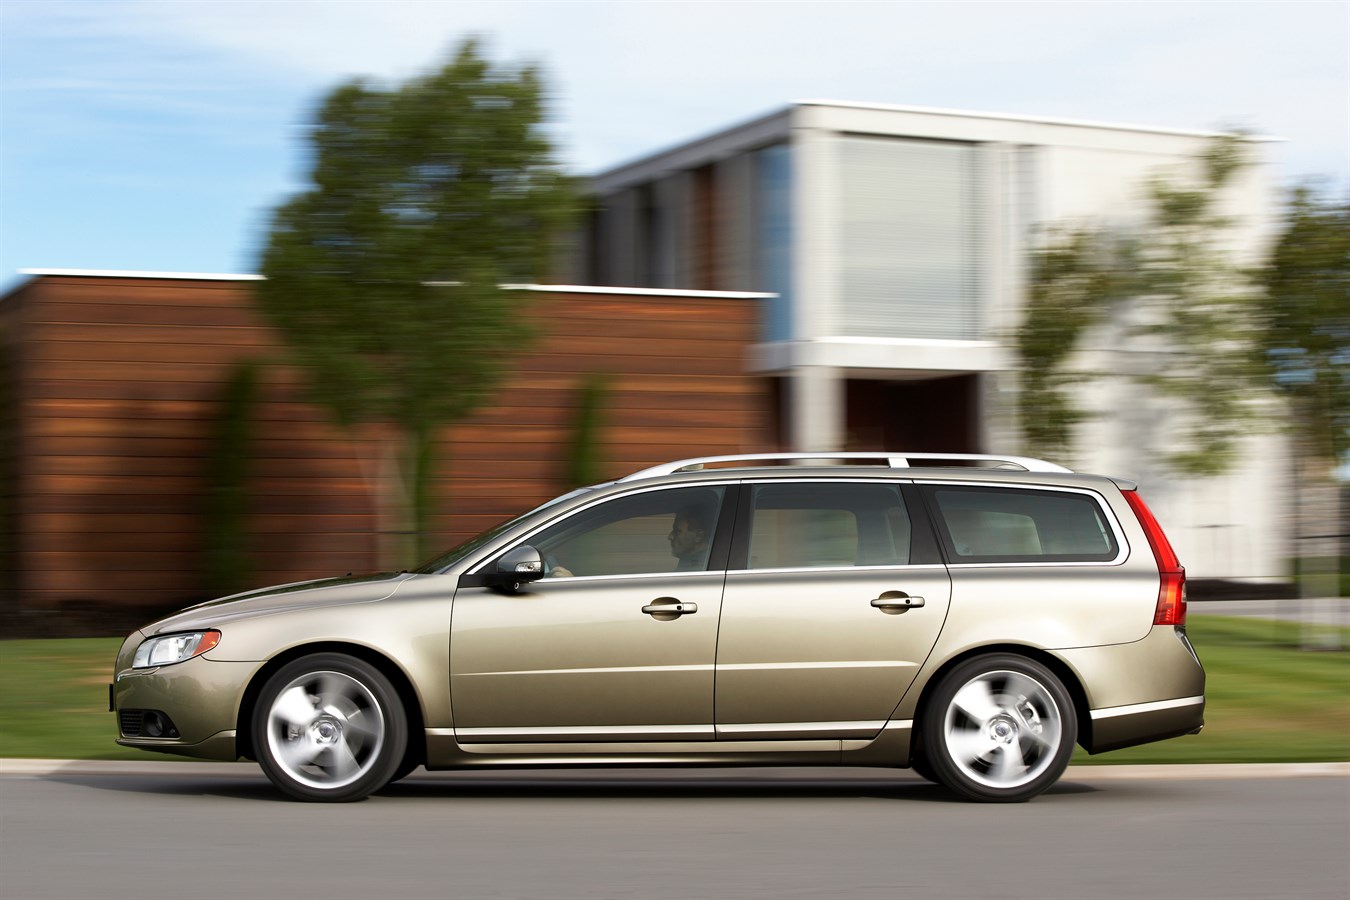 The all-new Volvo V70 - still number one in the estate car segment